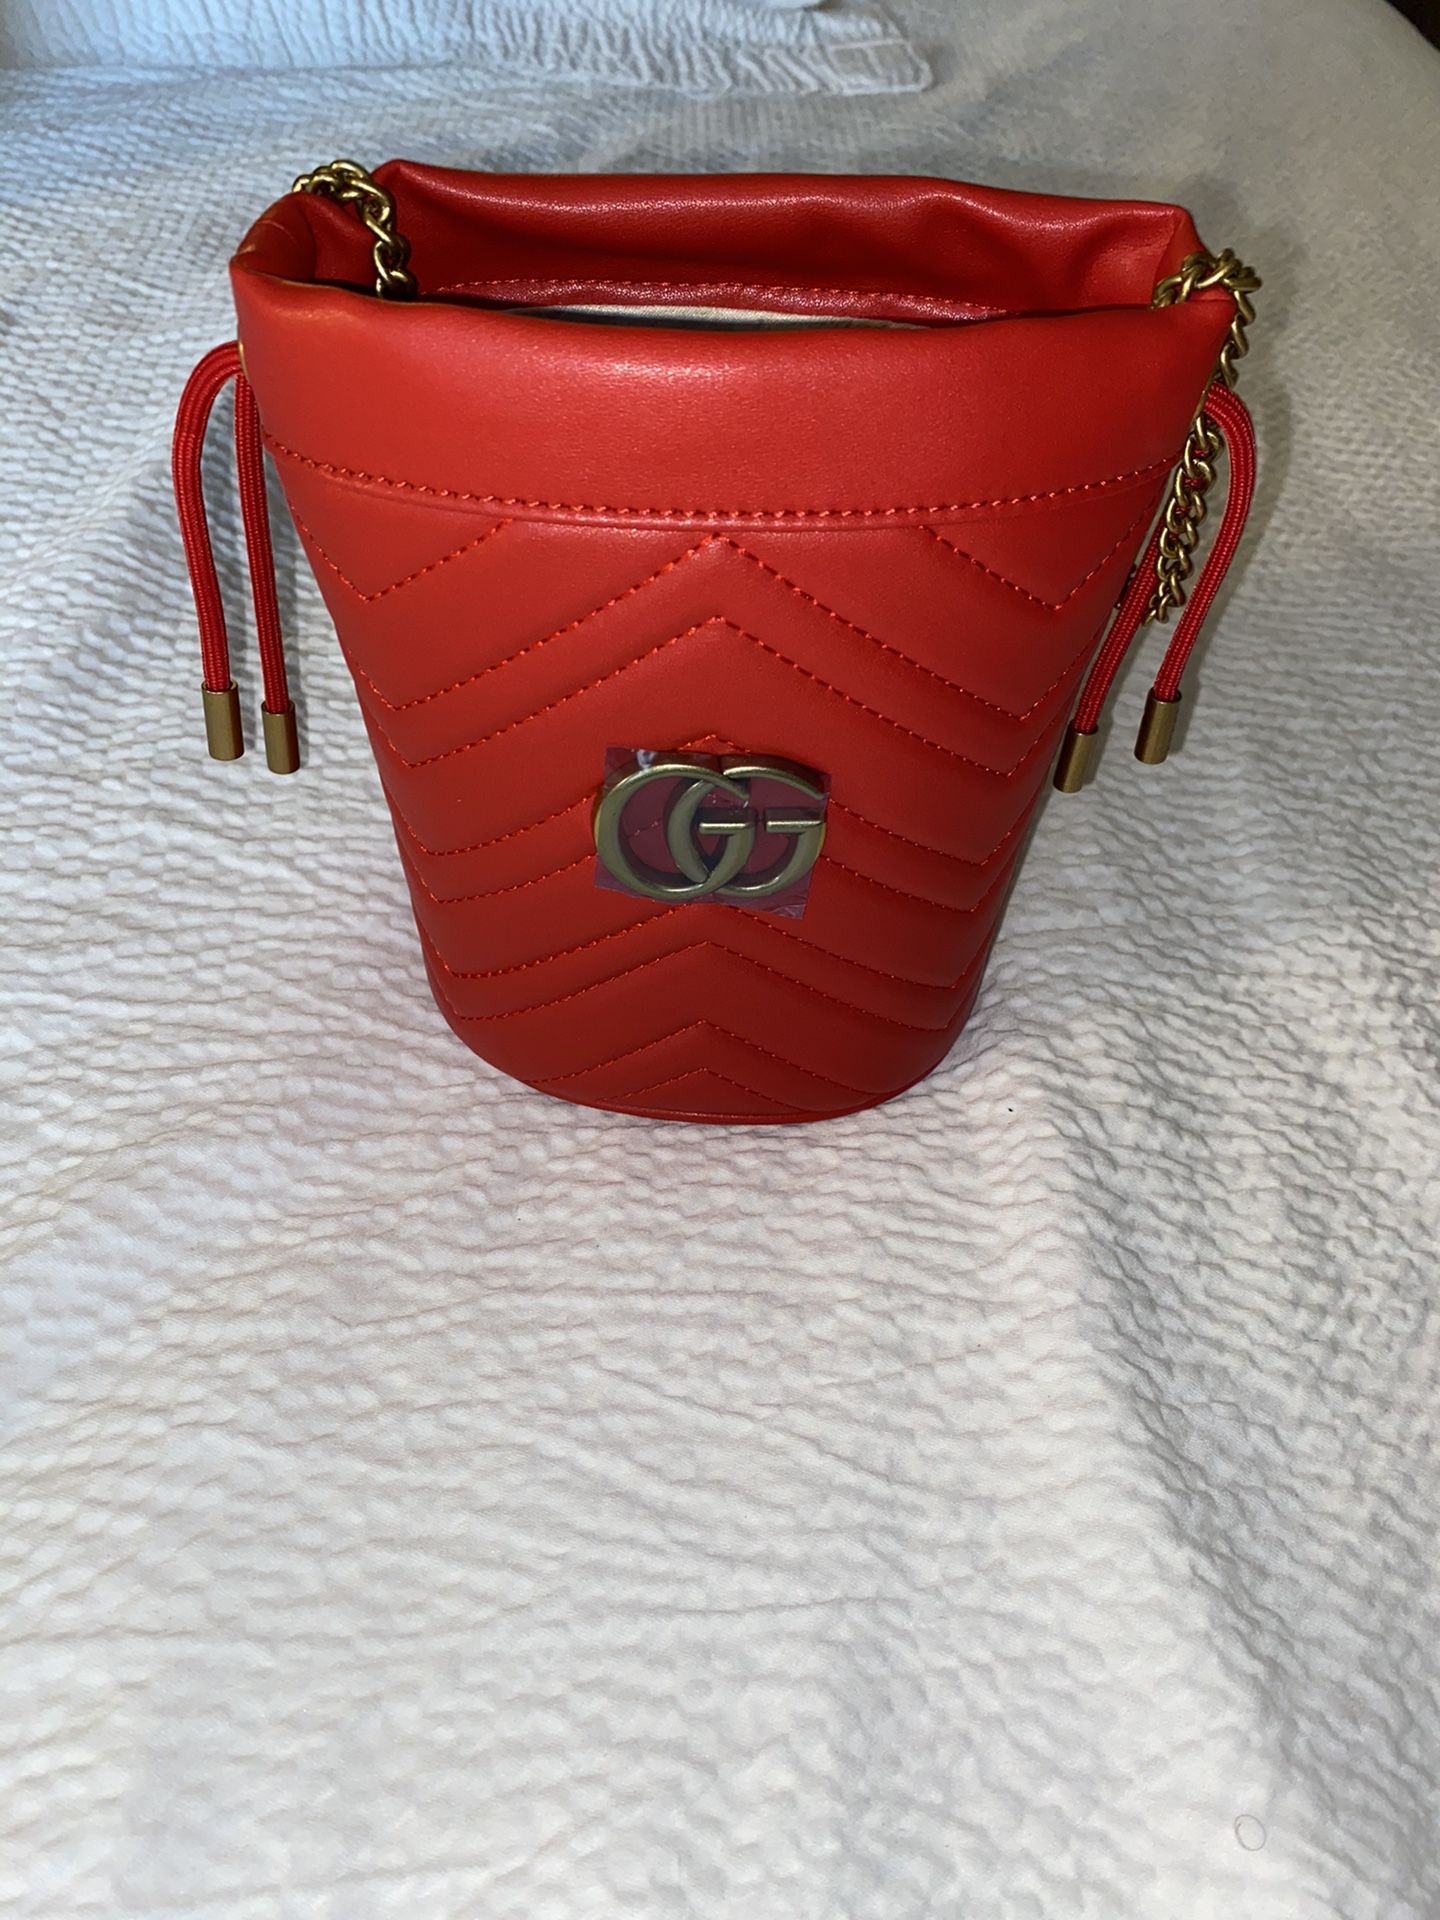 New Red Gucci GG Marmont mini bucket bag